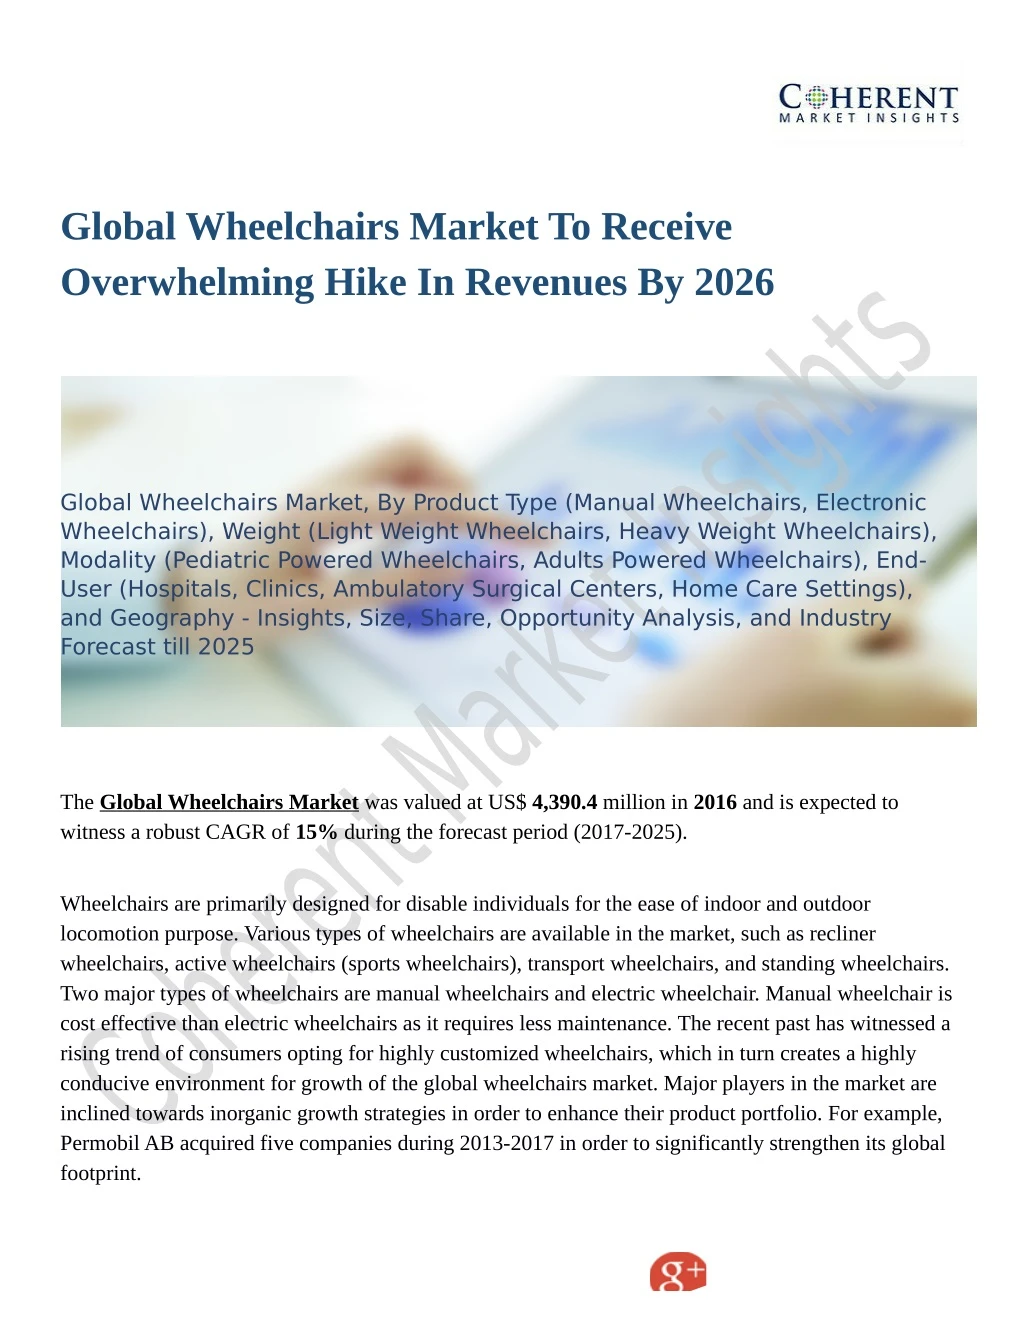 global wheelchairs market to receive overwhelming